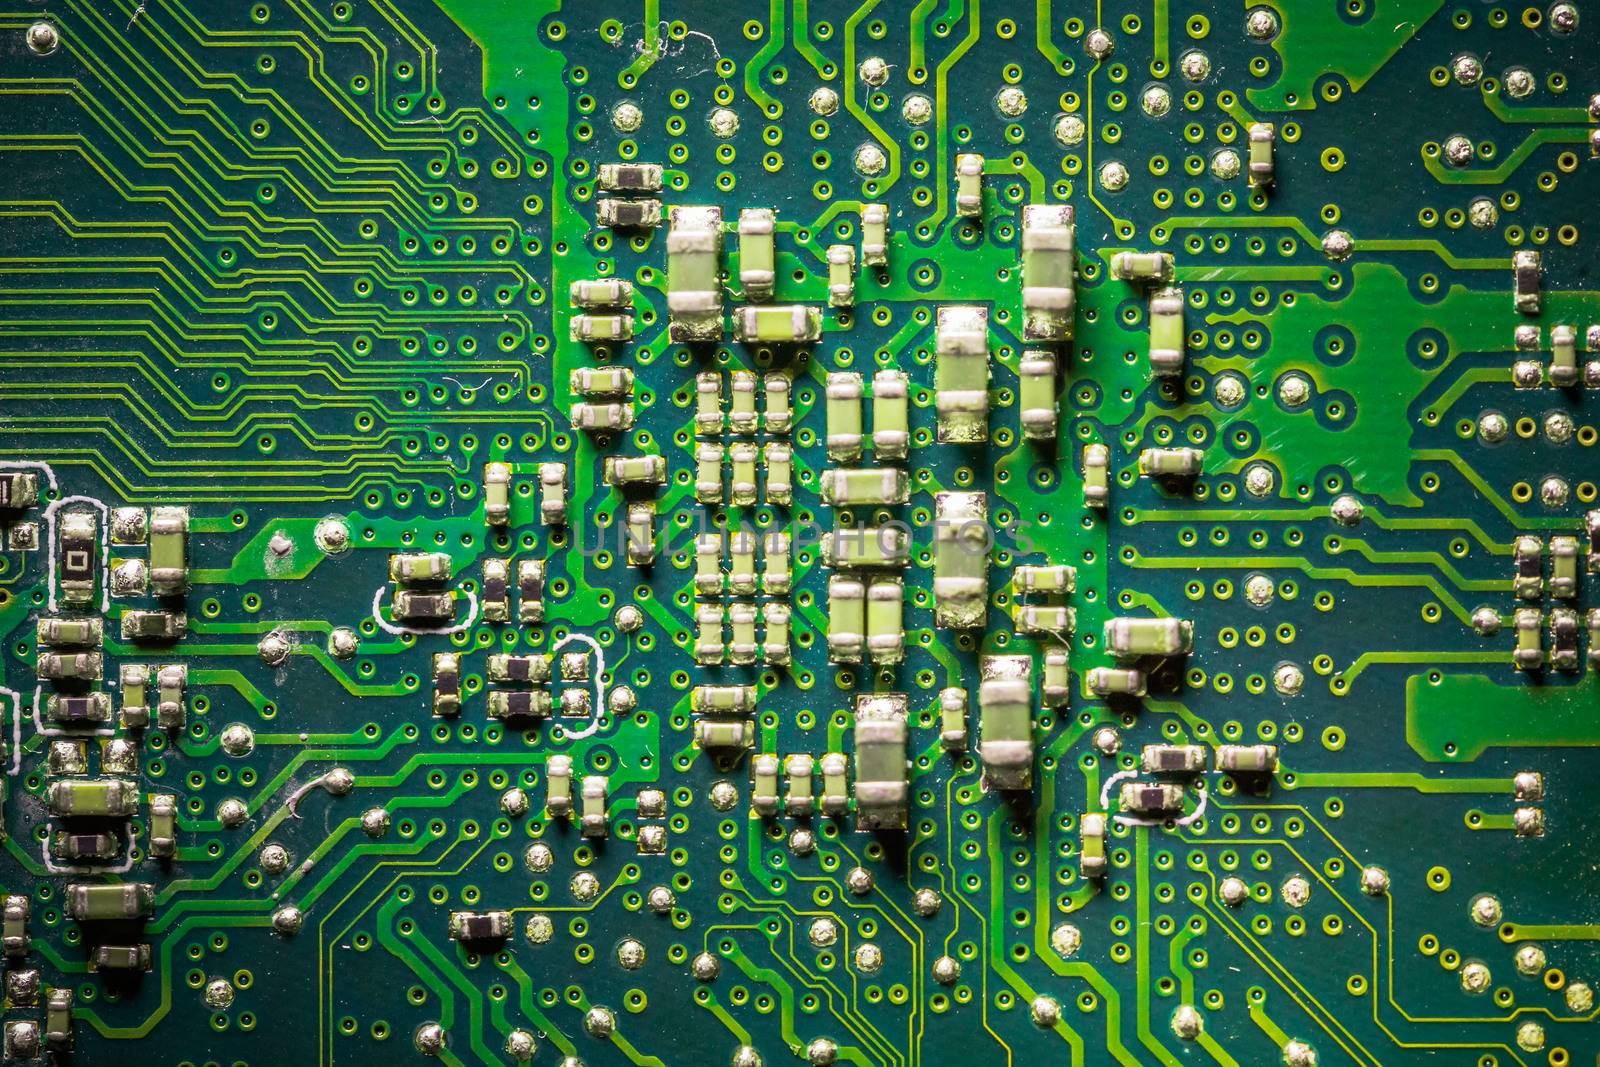 Close-up board with micro chips from an electrical appliance or computer. Concept of modern technology. Concept of electronics and microchips. SMD capacitors and resistors on green PCB. by petrsvoboda91